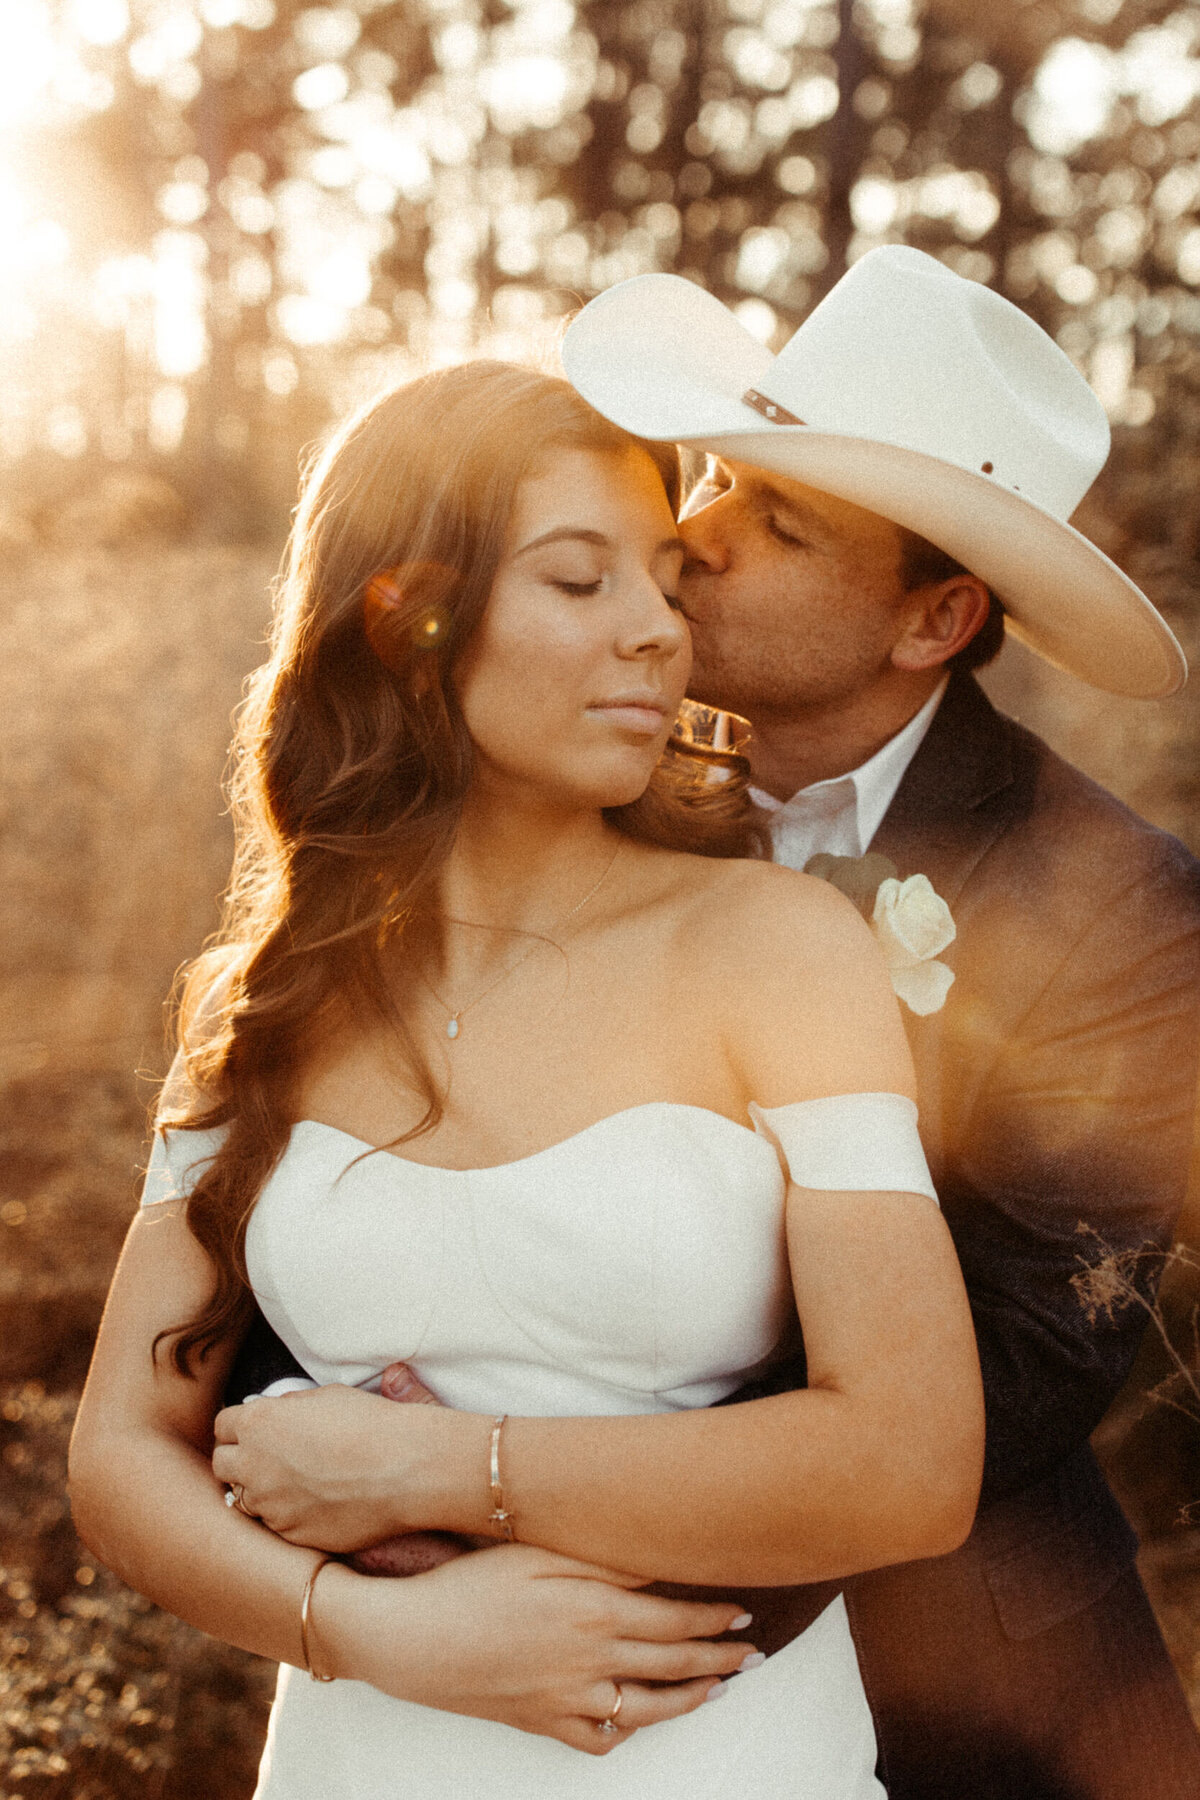 Groom wrapping his arms around his bride and kissing her on the cheek during sunset in the woods